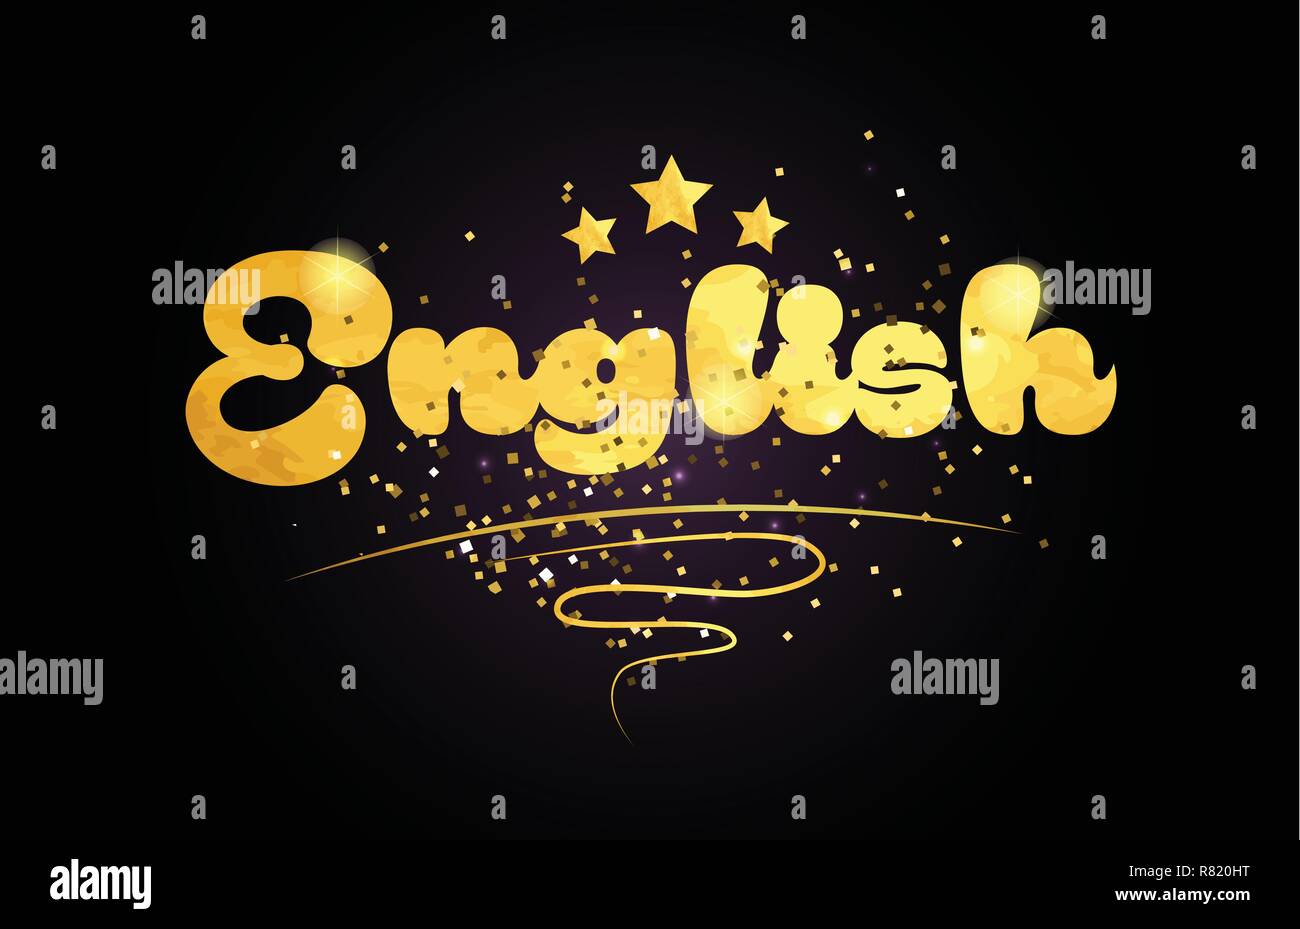 Learn English Logo Vector Images (over 1,400)